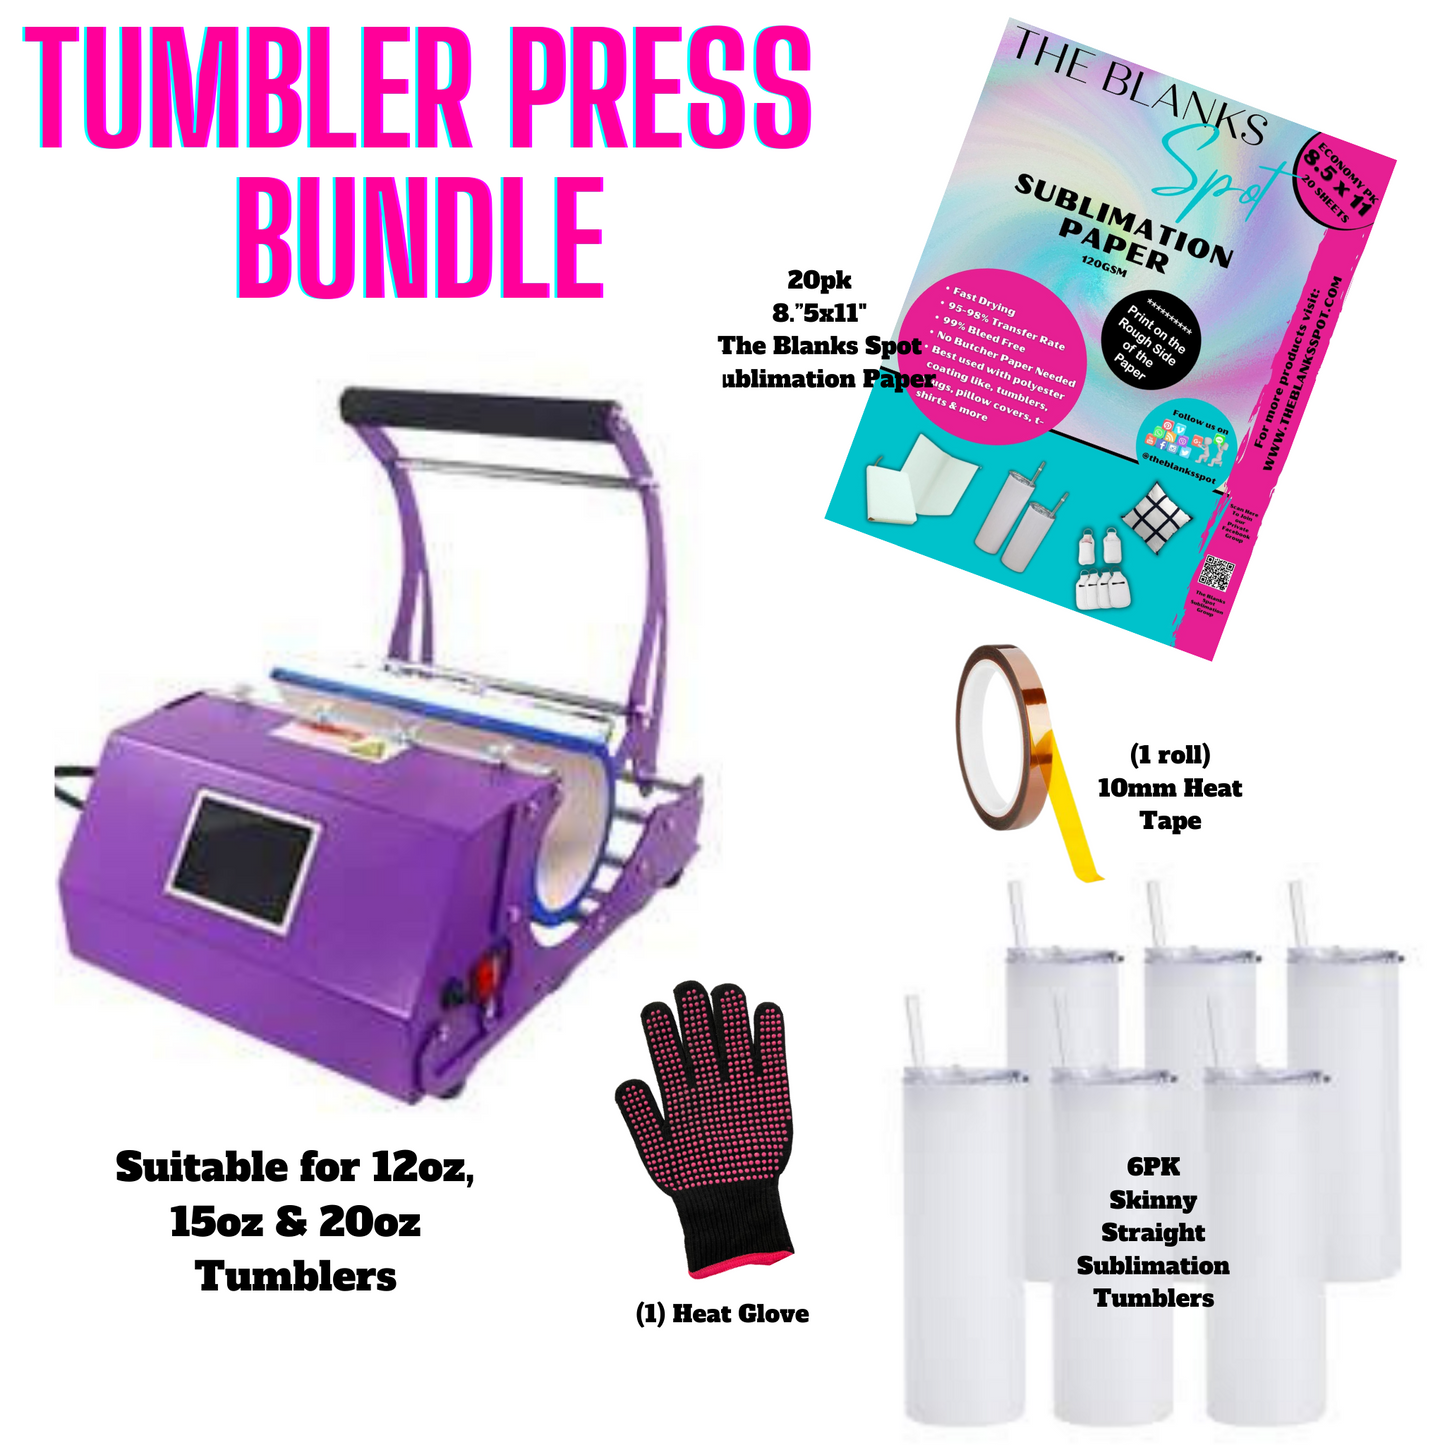 Tumbler Press BUNDLE (IF SHIPPING, MUST PURCHASE SEPARATE FROM OTHER ITEMS)